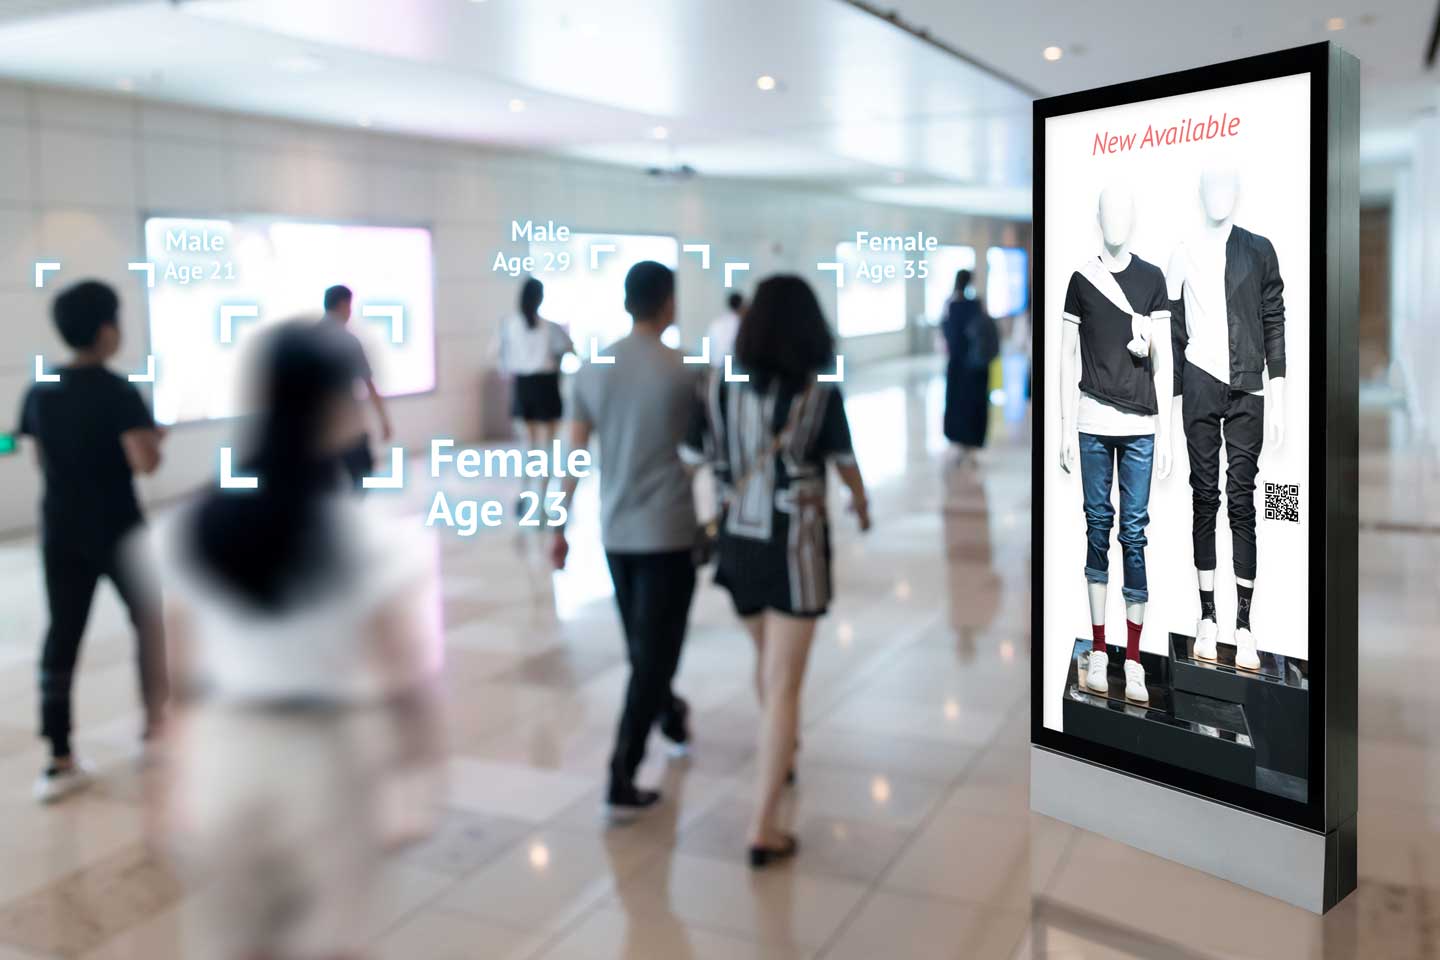 Validate your OOH campaign’s effectiveness.